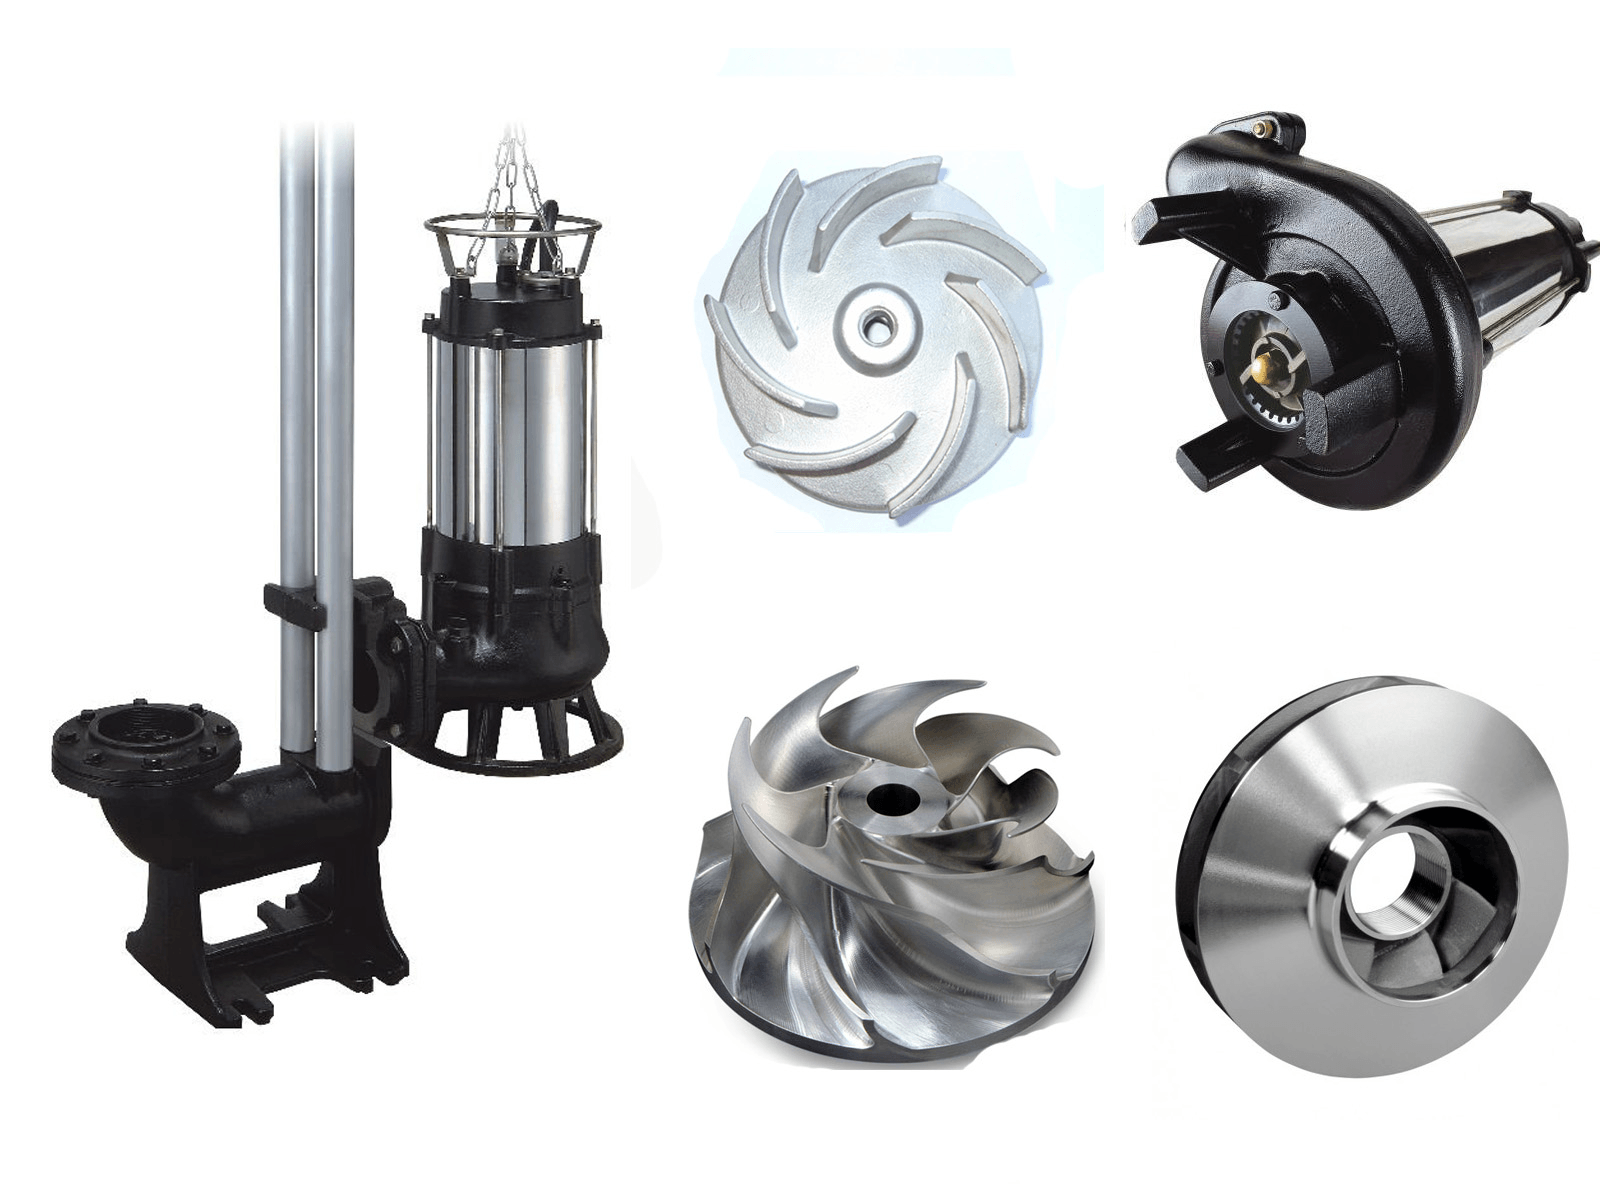 Grinder pump cutting blades and fittings from Shanghai Pacific Pump Manufacture Co., Ltd.